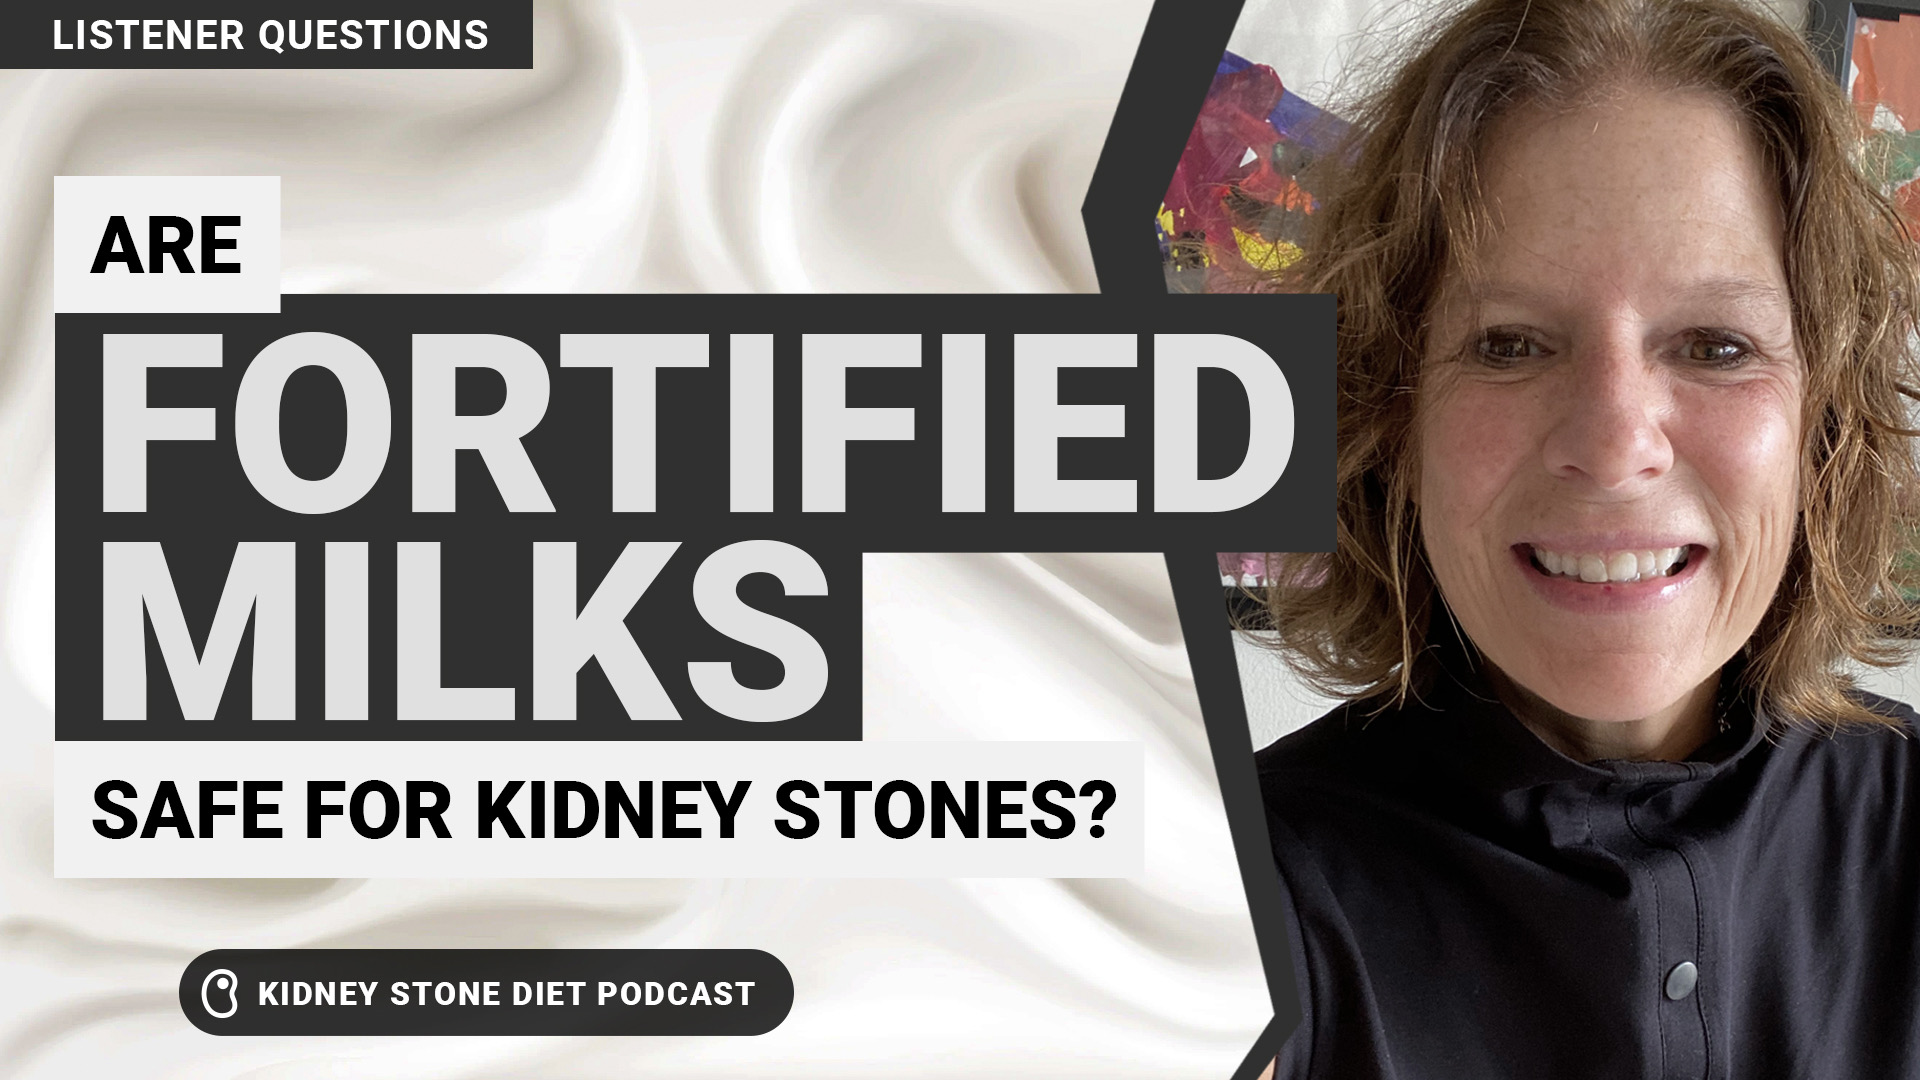 Are fortified milks safe for kidney stones?